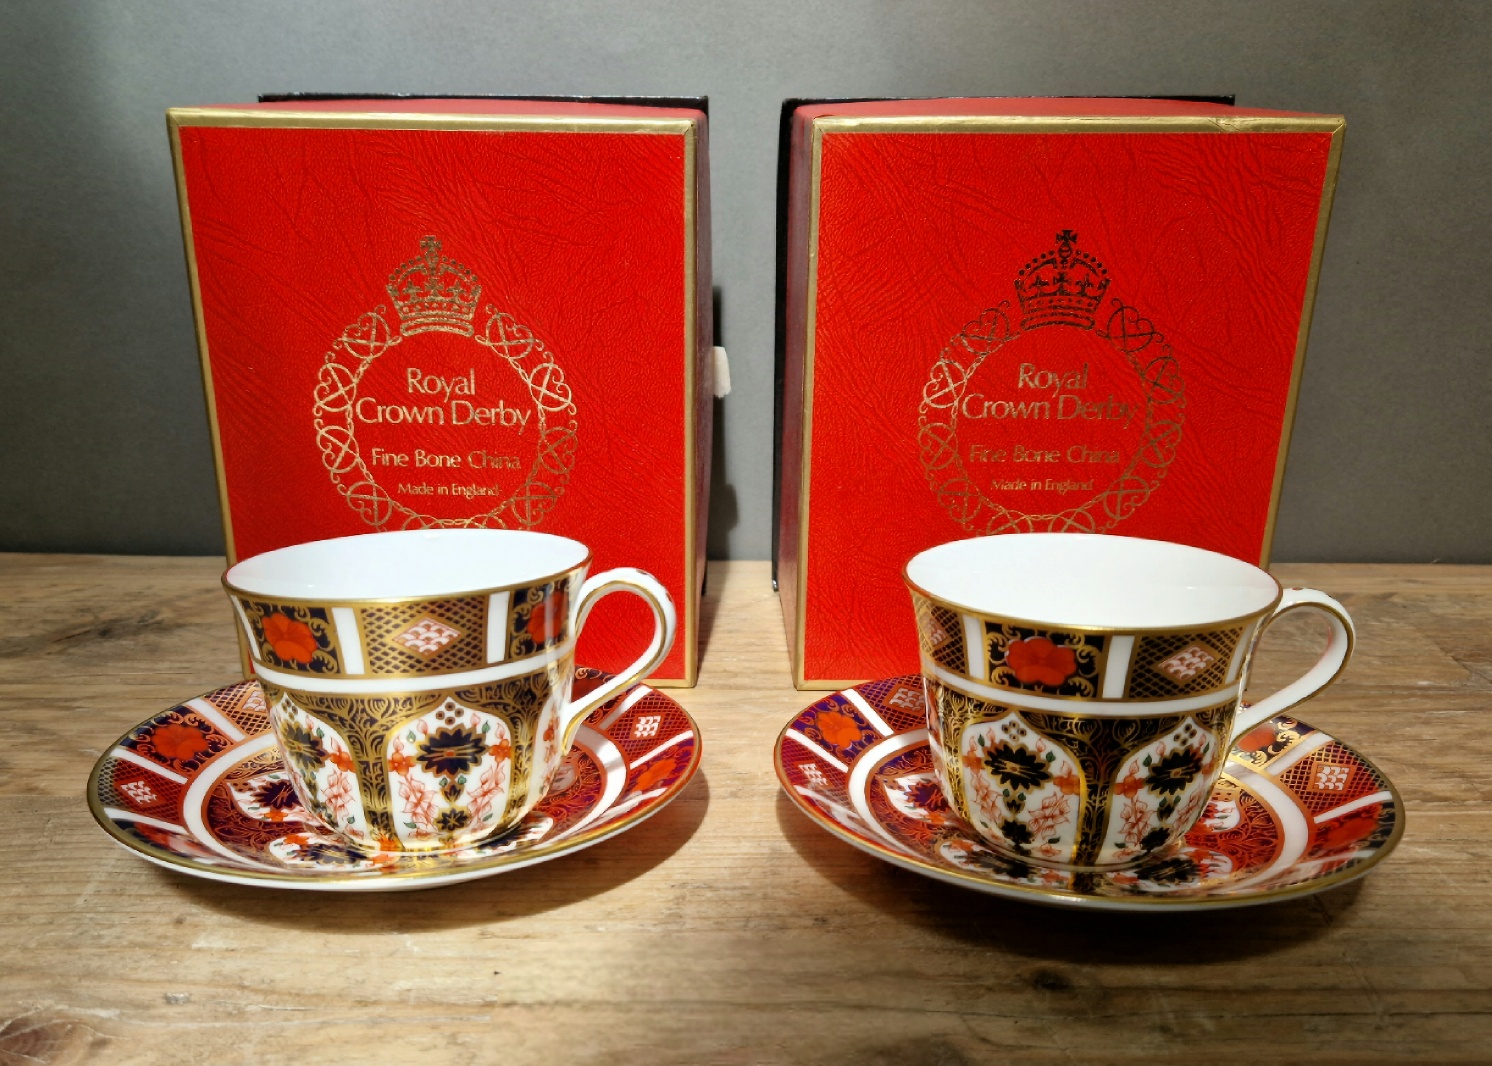 A set of two Royal Crown Derby 1128 Imari teacups and saucers, with boxes.